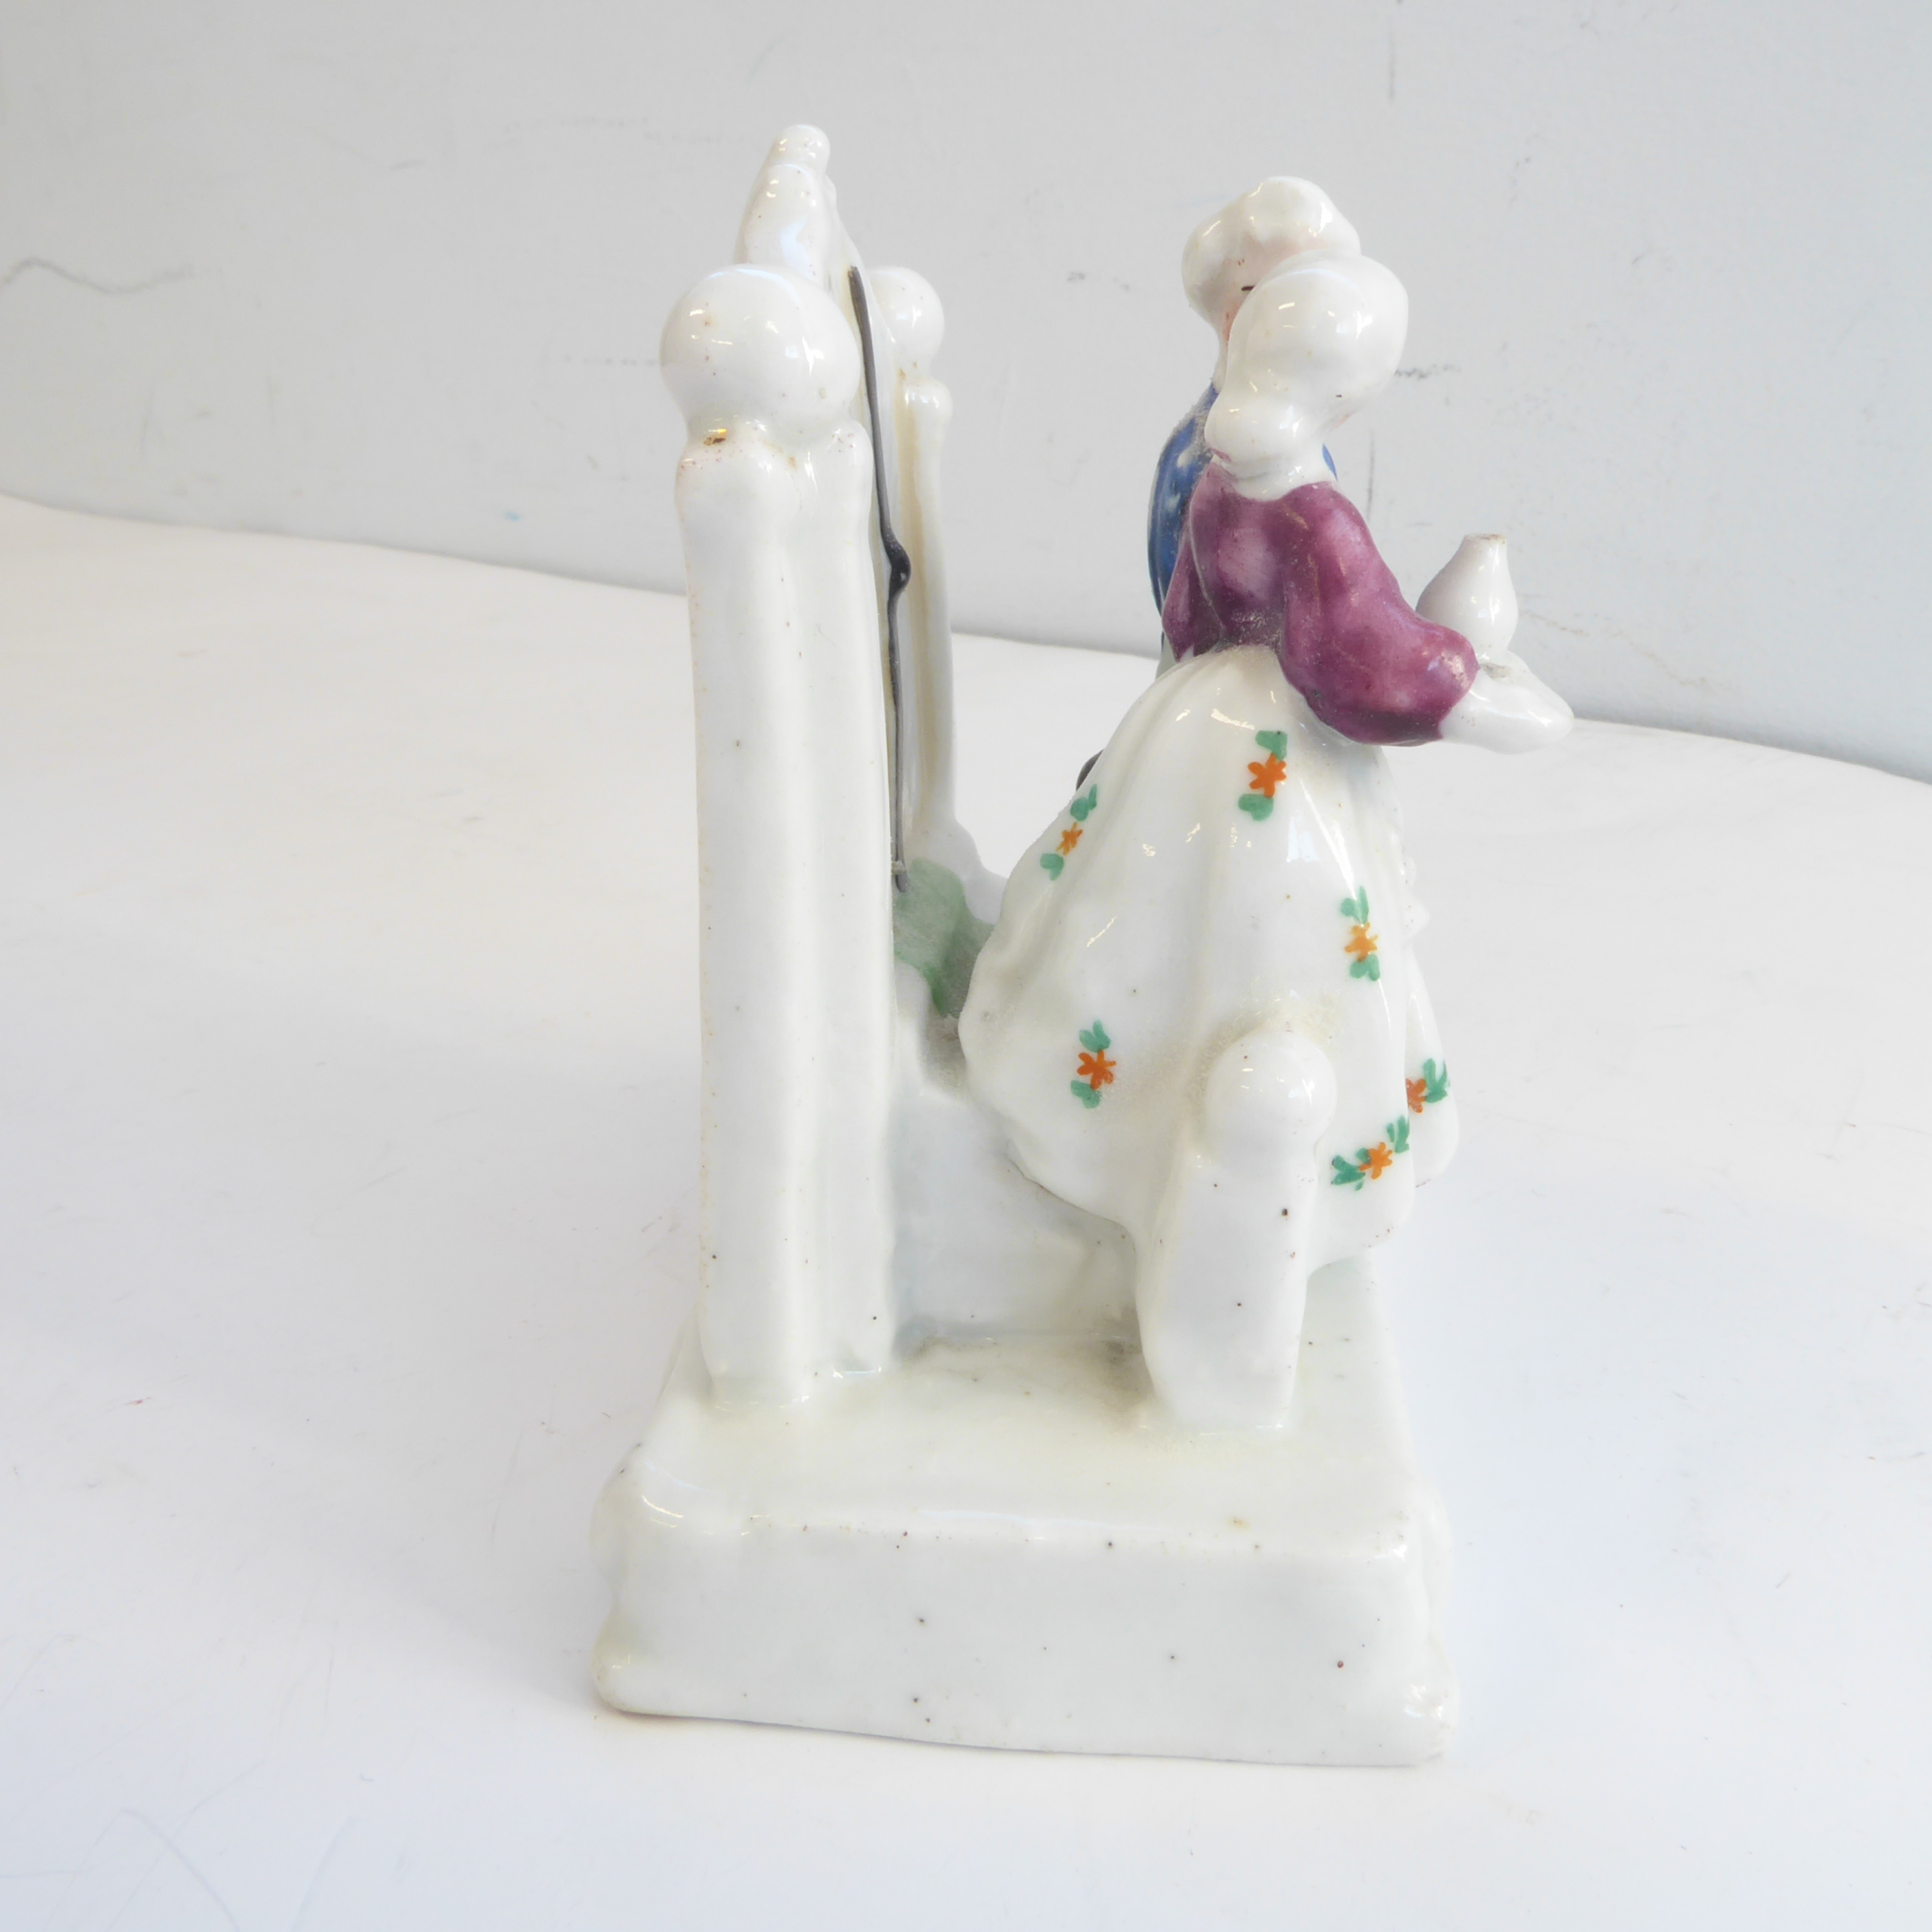 Twelve 19th century fairings to include 'The attentive maid', 'The broken hoop', 'The wedding - Image 38 of 49